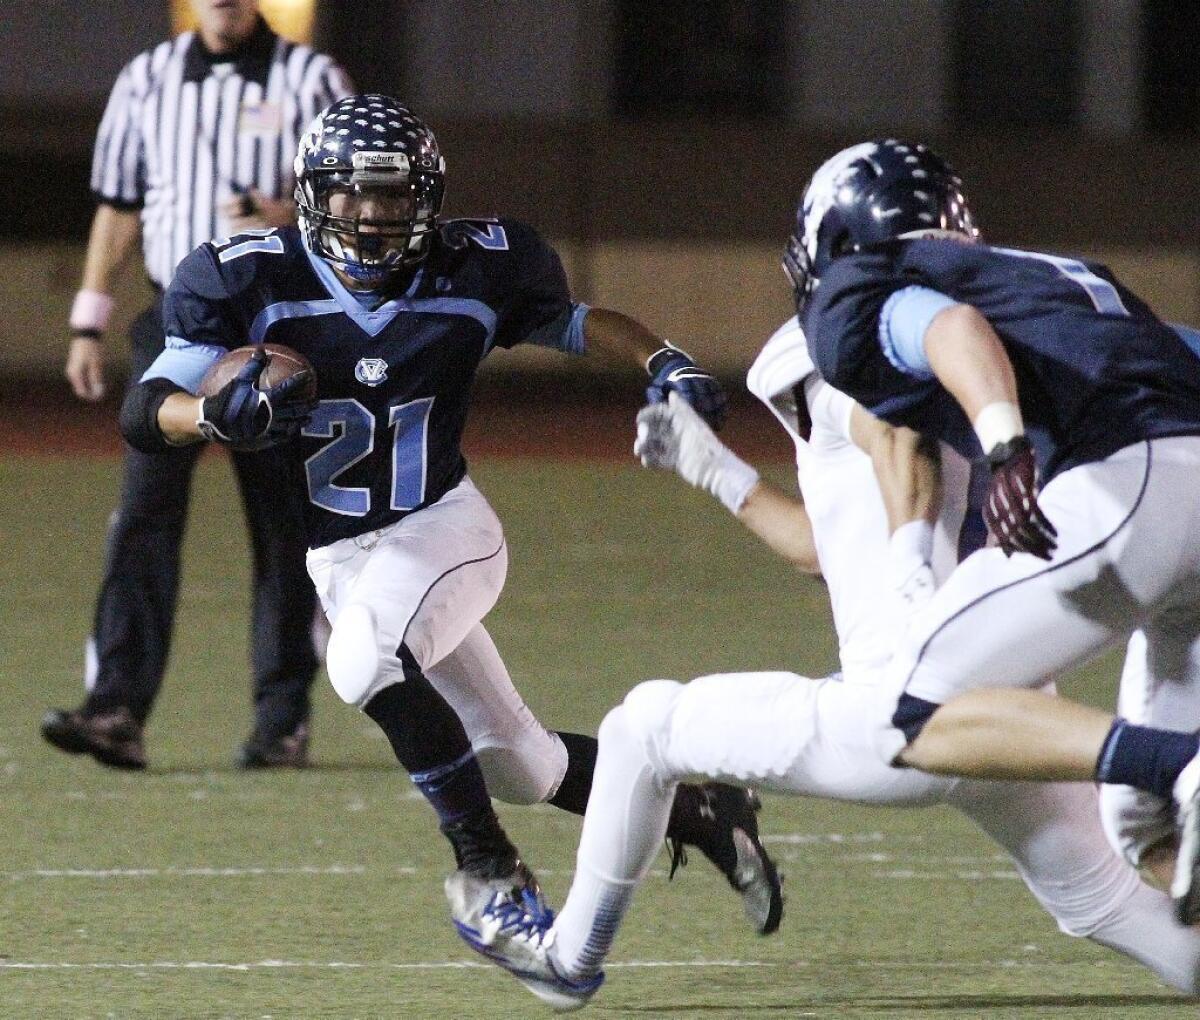 ARCHIVE PHOTO: Crescenta Valley High running back Jonathan Jun will look to help spark the Falcons to a Pacific League win against Glendale Friday.